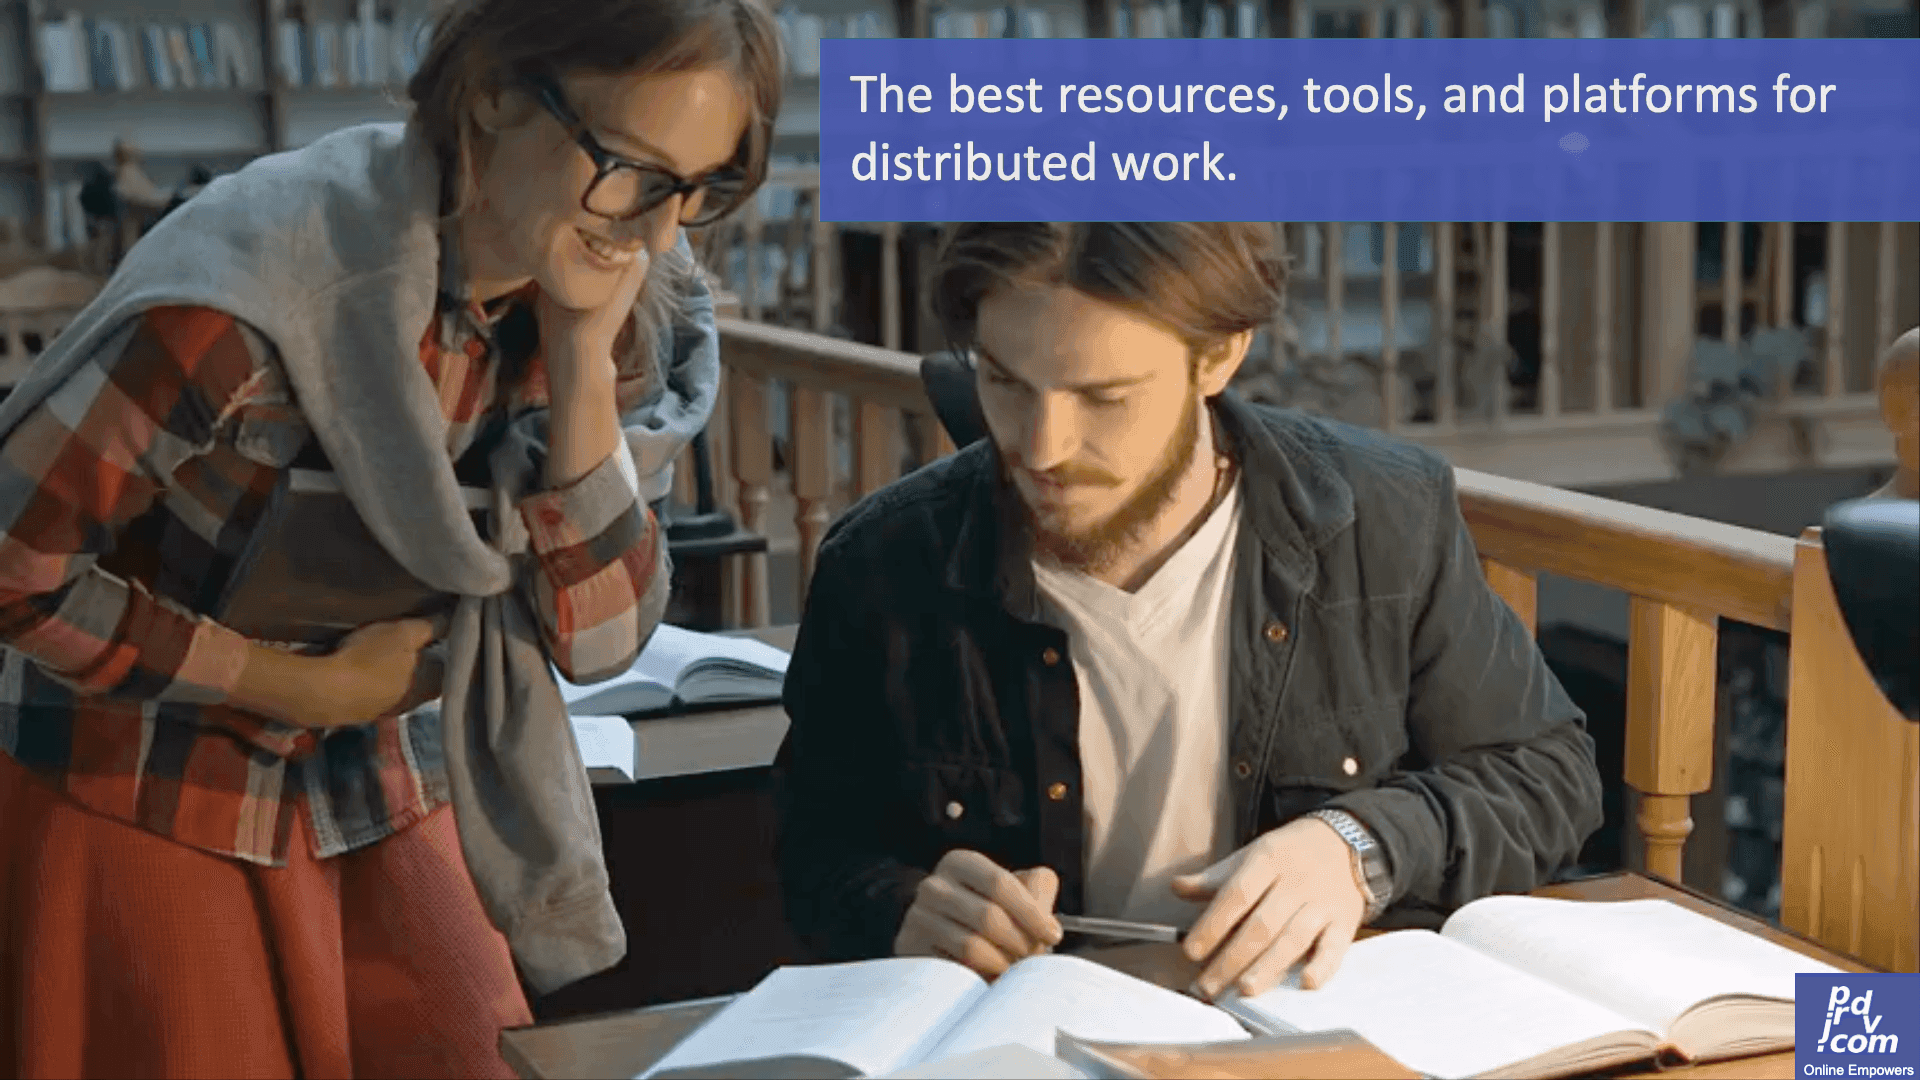 The best resources, tools, and platforms for distributed work.